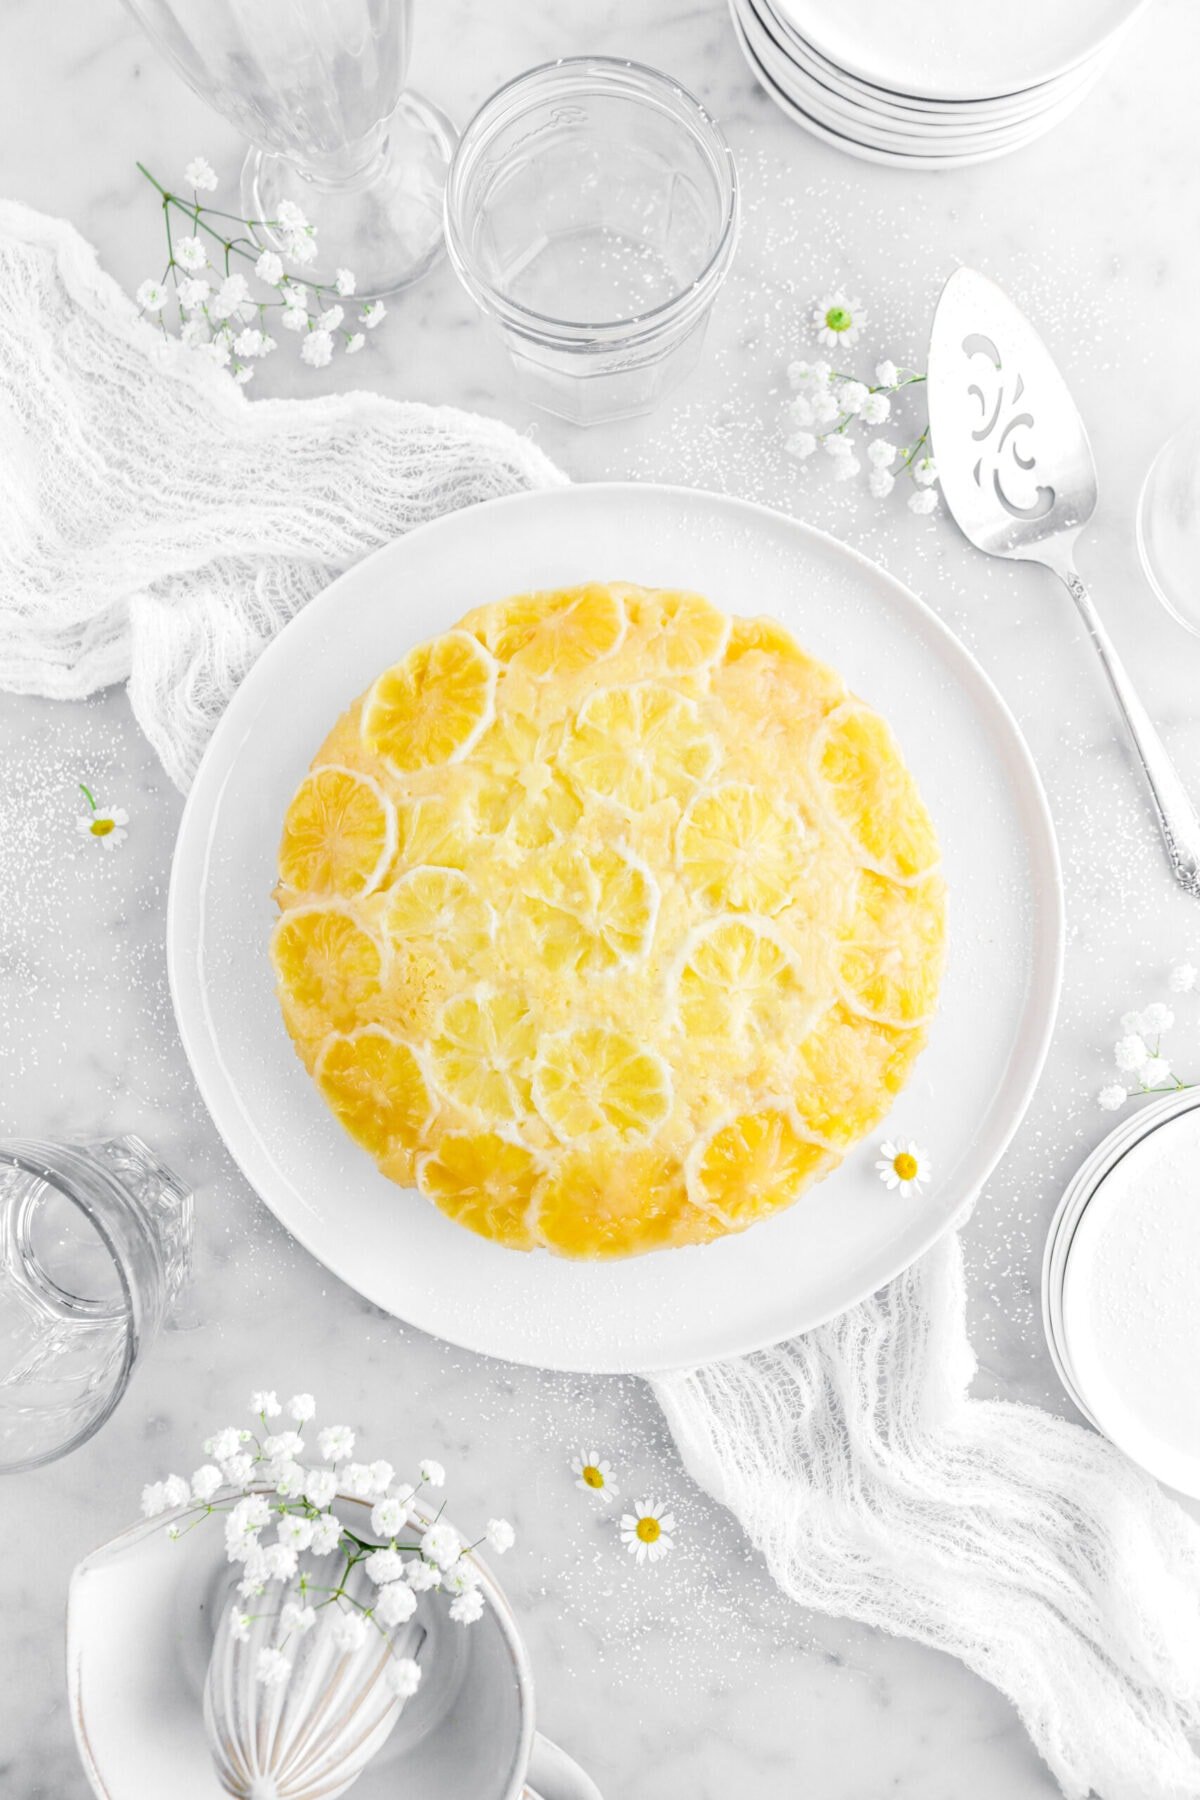 lemon upside down cake on white plate on top of a white cheesecloth with chamomile and other white flowers around on marble surface.